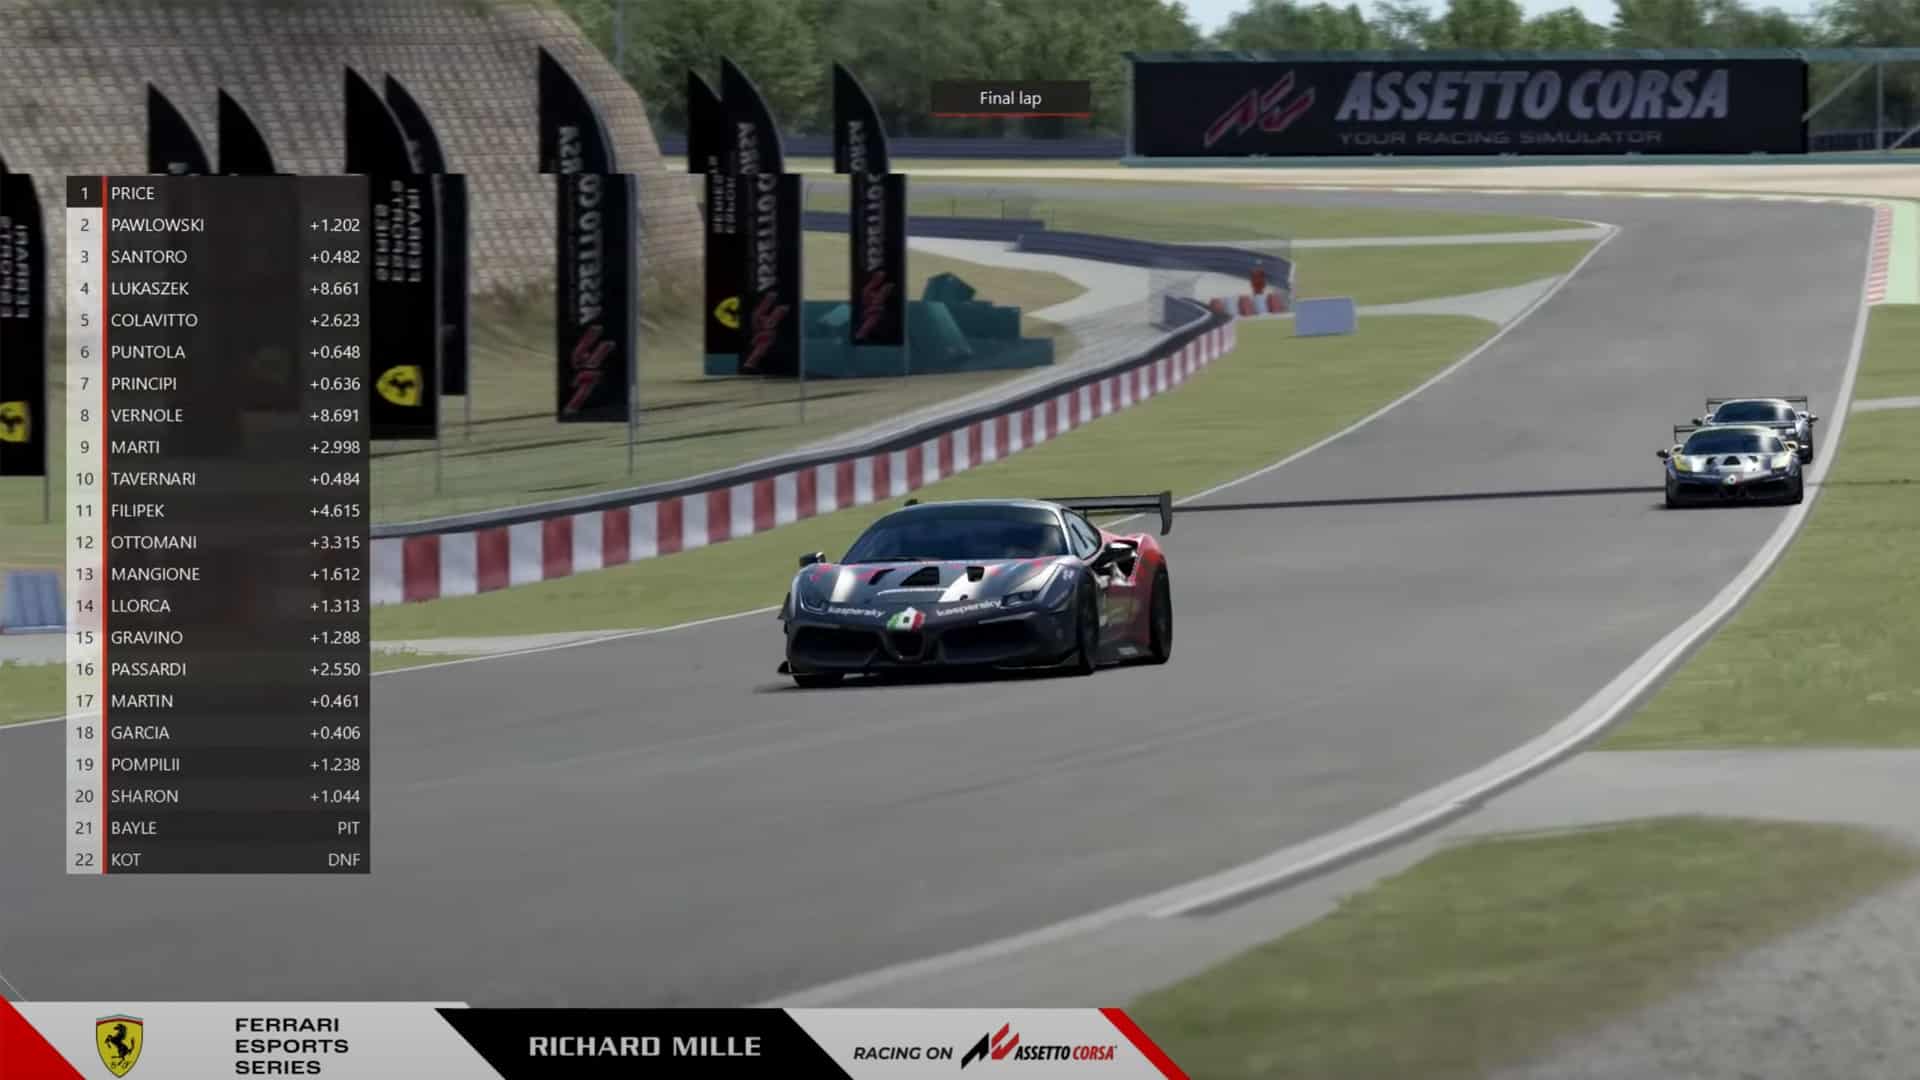 Price and Lacombe take first victories in third phase of Ferrari Esports Series